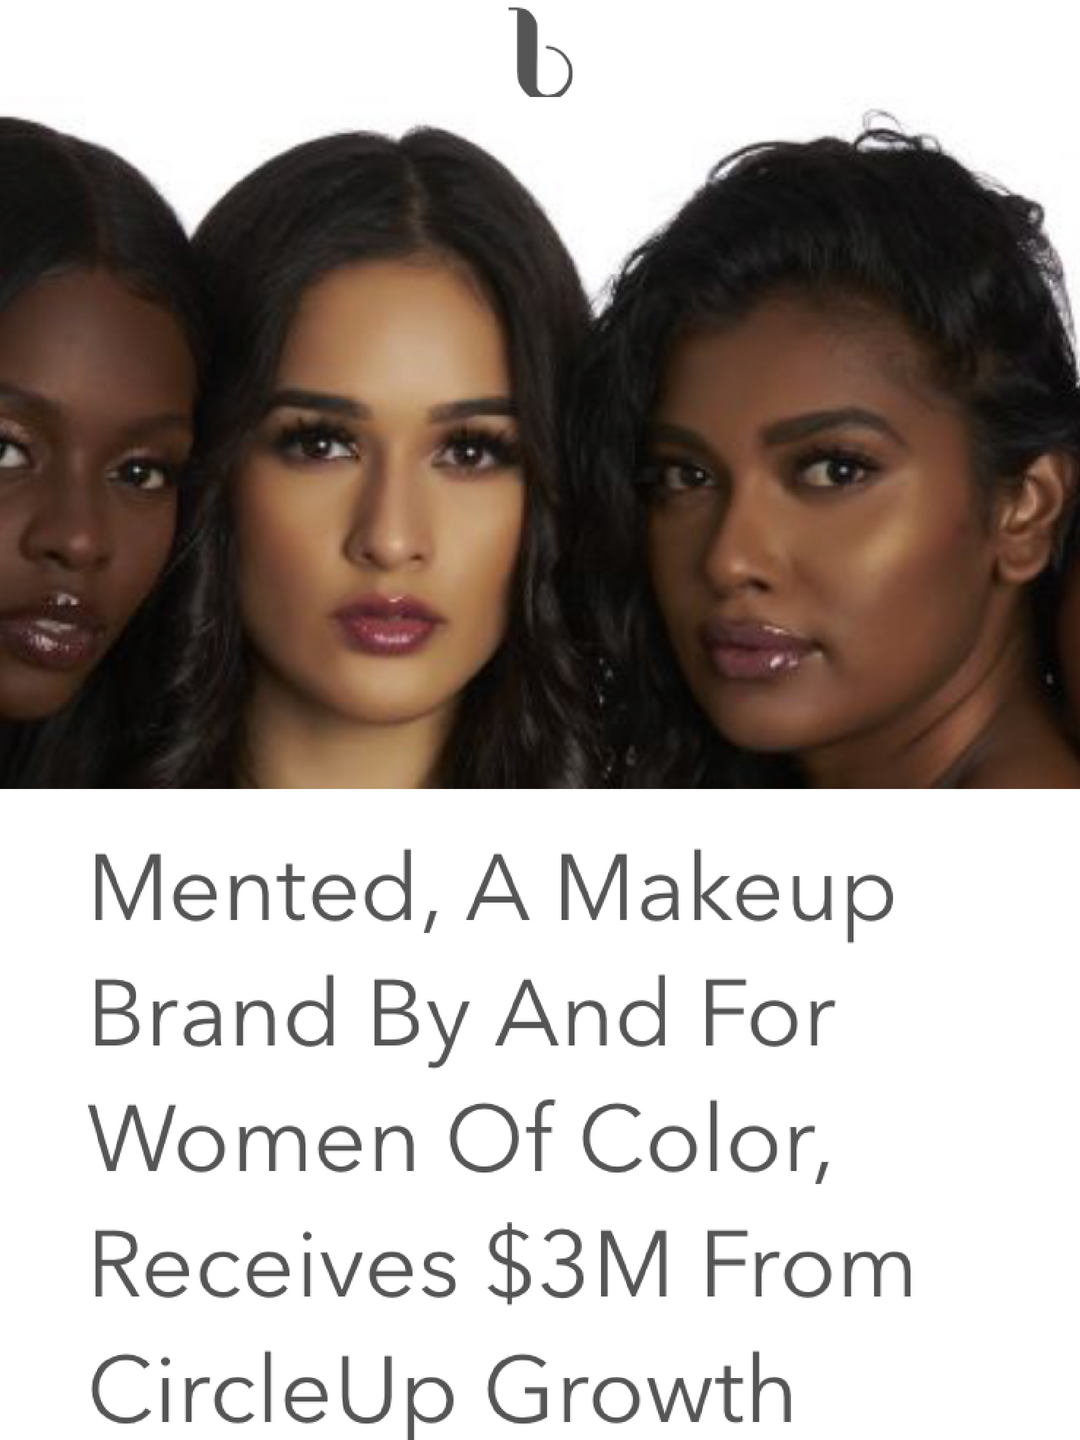 Mented, A Makeup Brand By And For Women Of Color, Receives $3M From CircleUp Growth Partners